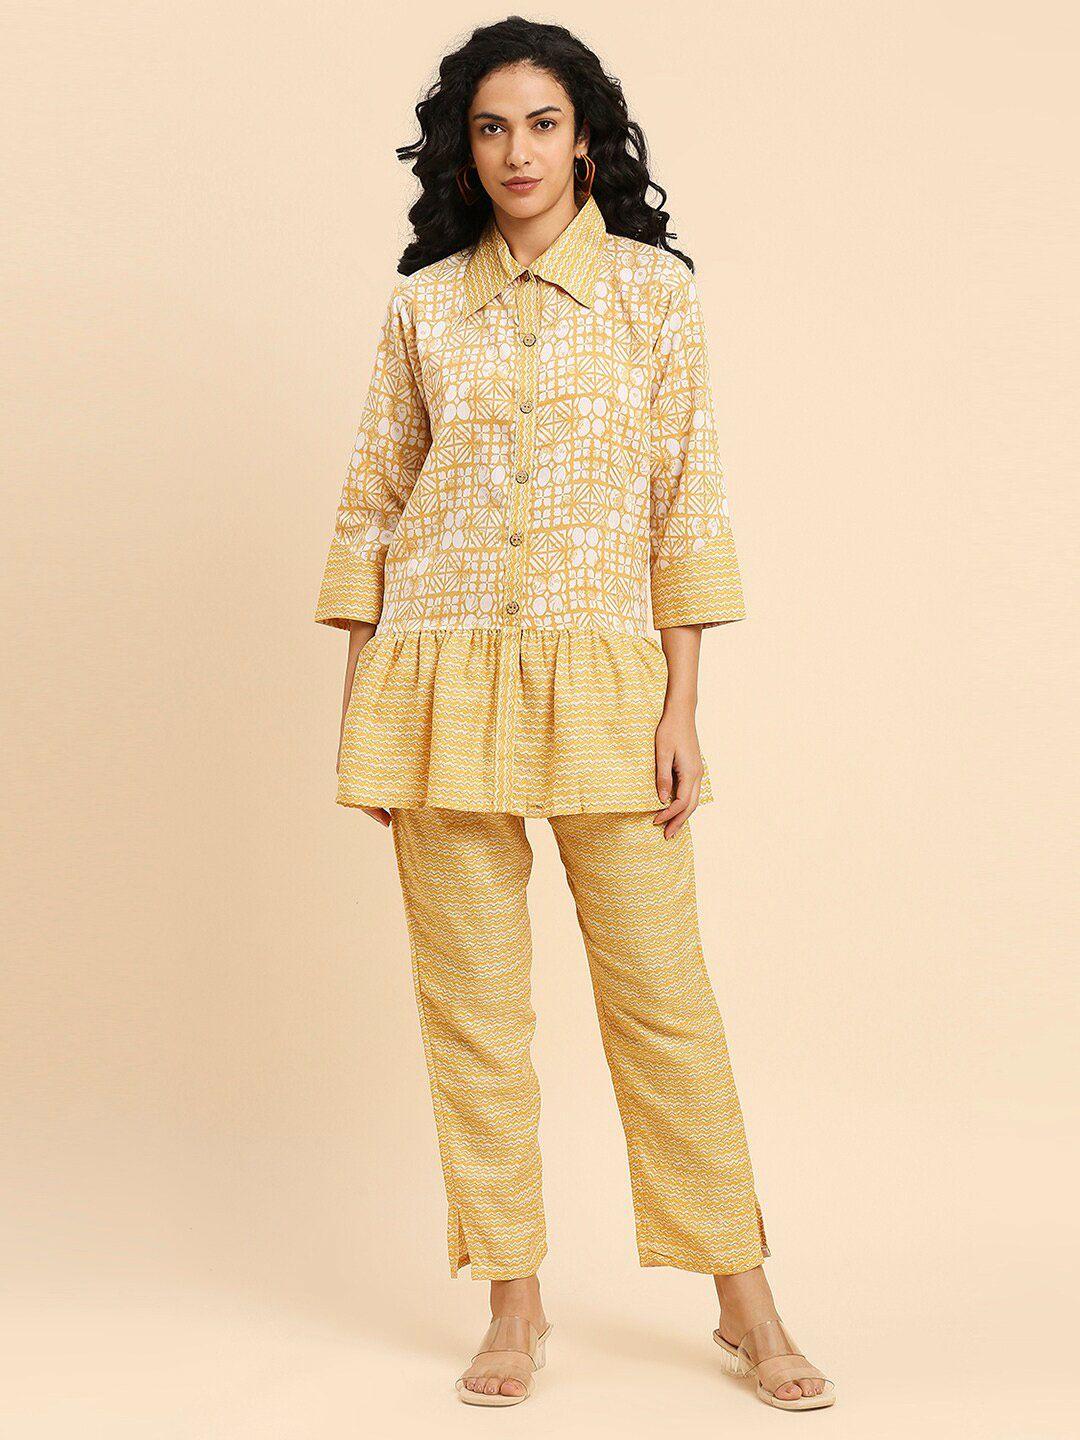 gufrina printed top with trousers